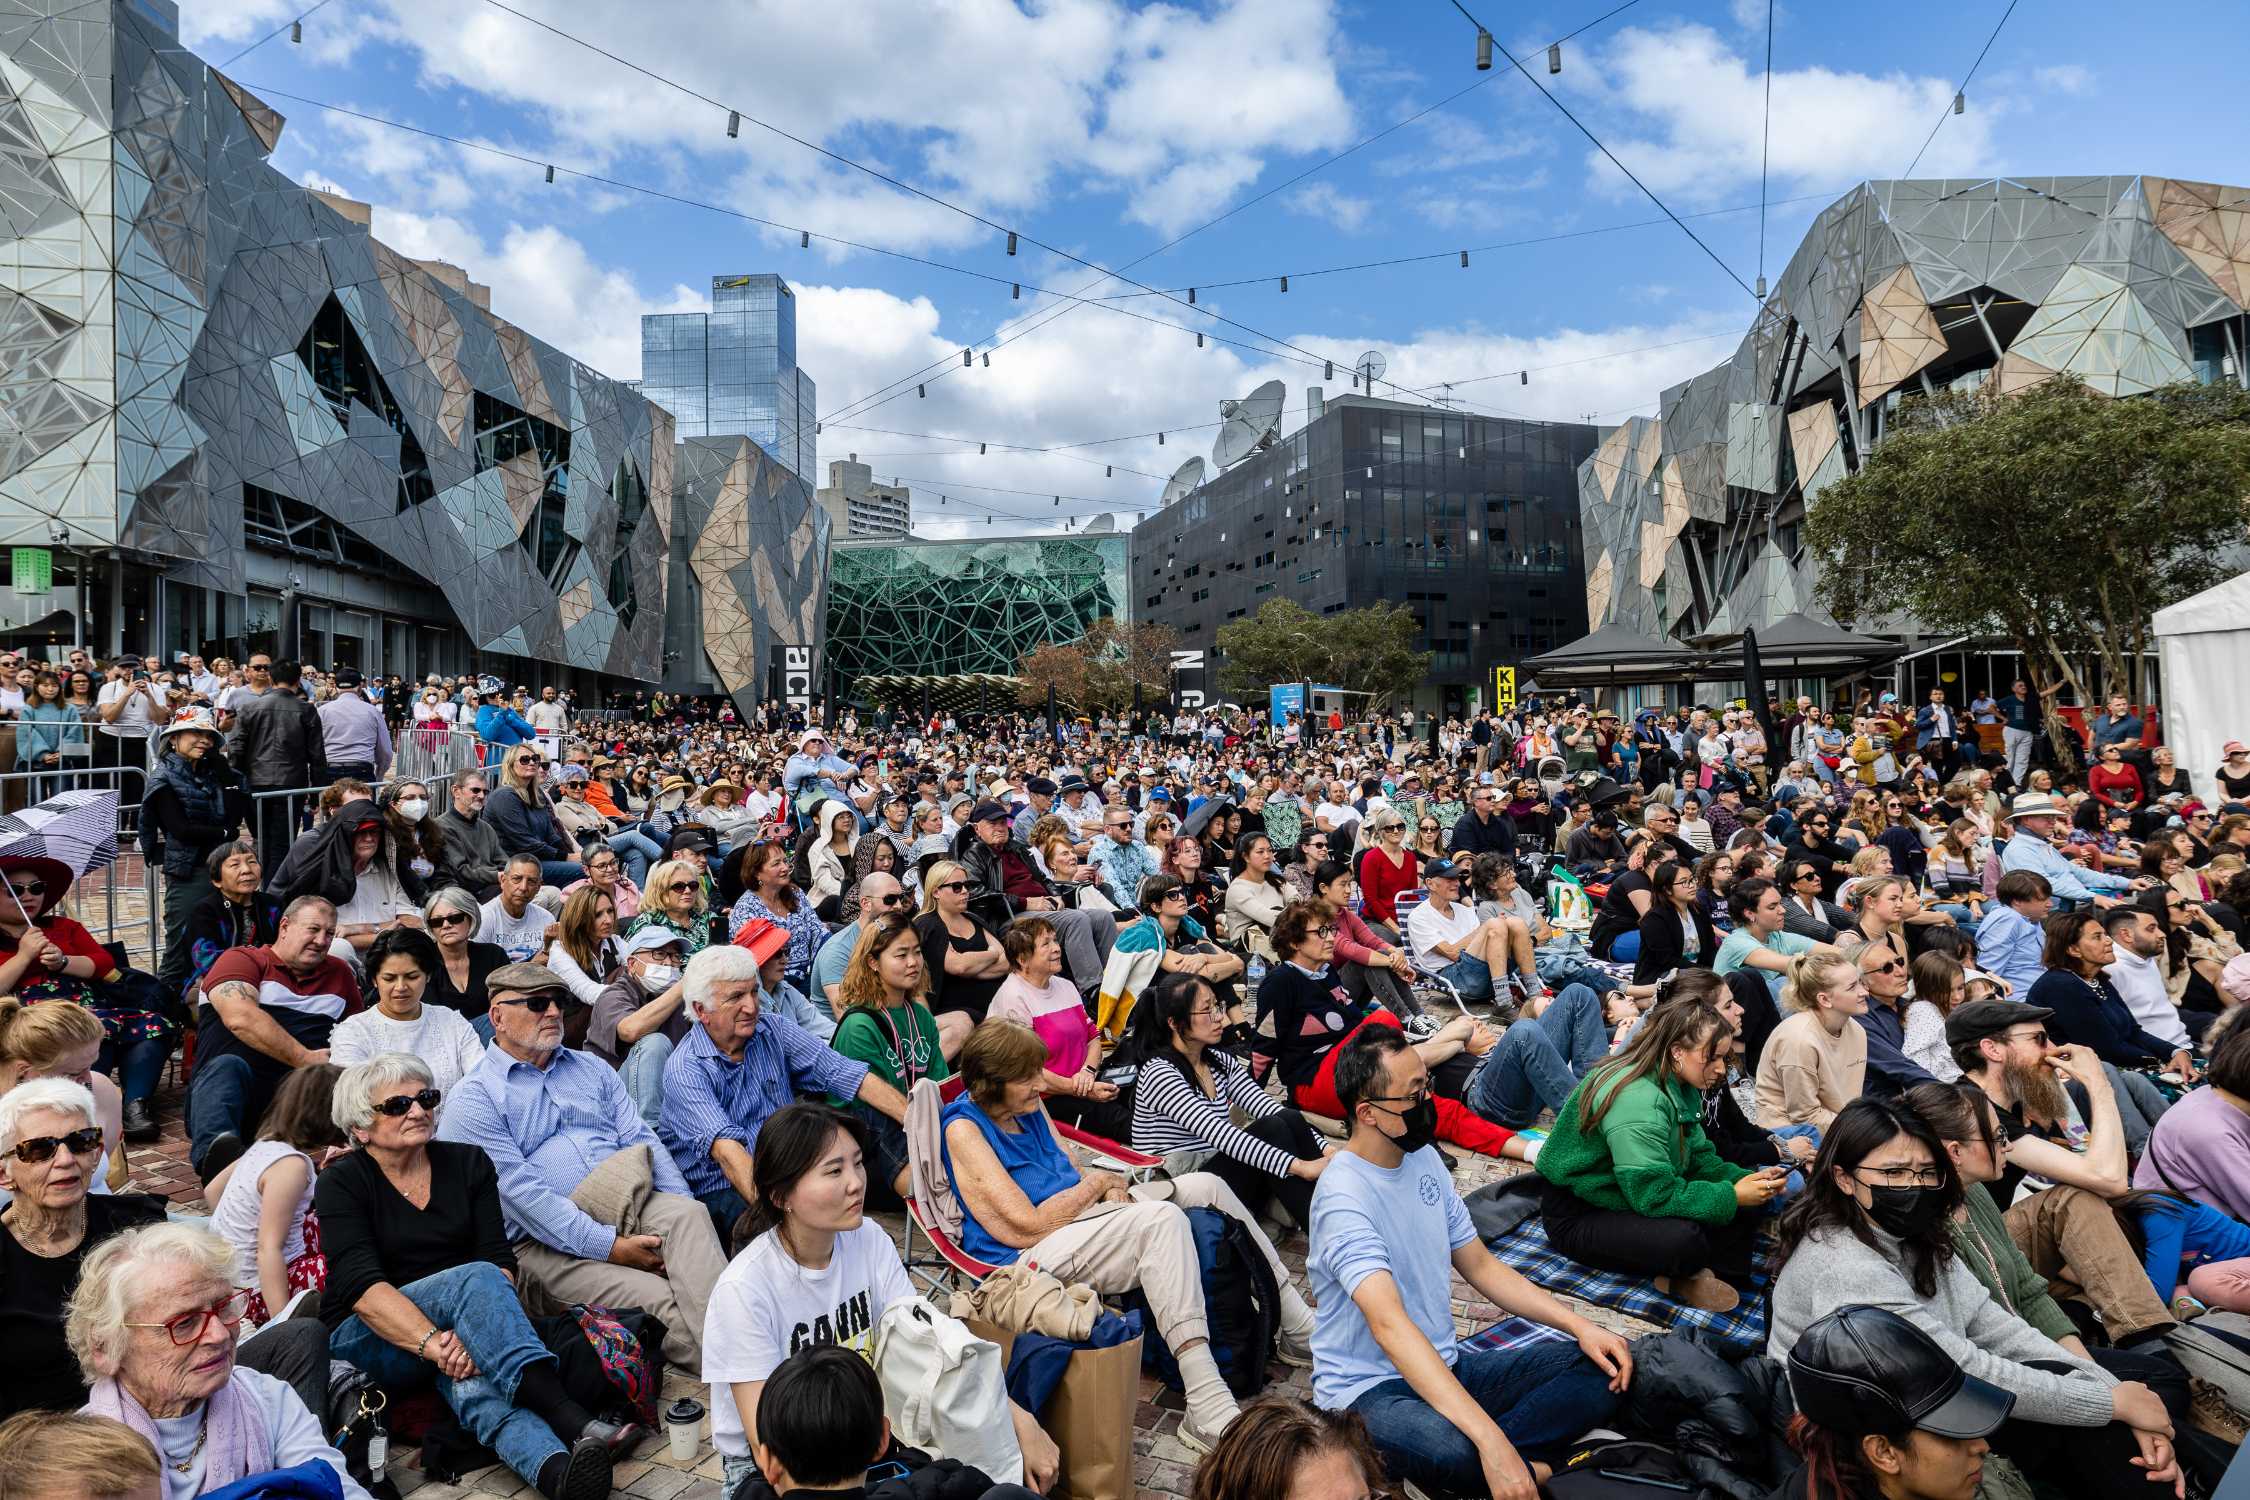 Thousands flock to first “BMW Opera for All” concert in Australia. Support of local arts and culture scene in partnership with Opera Australia.